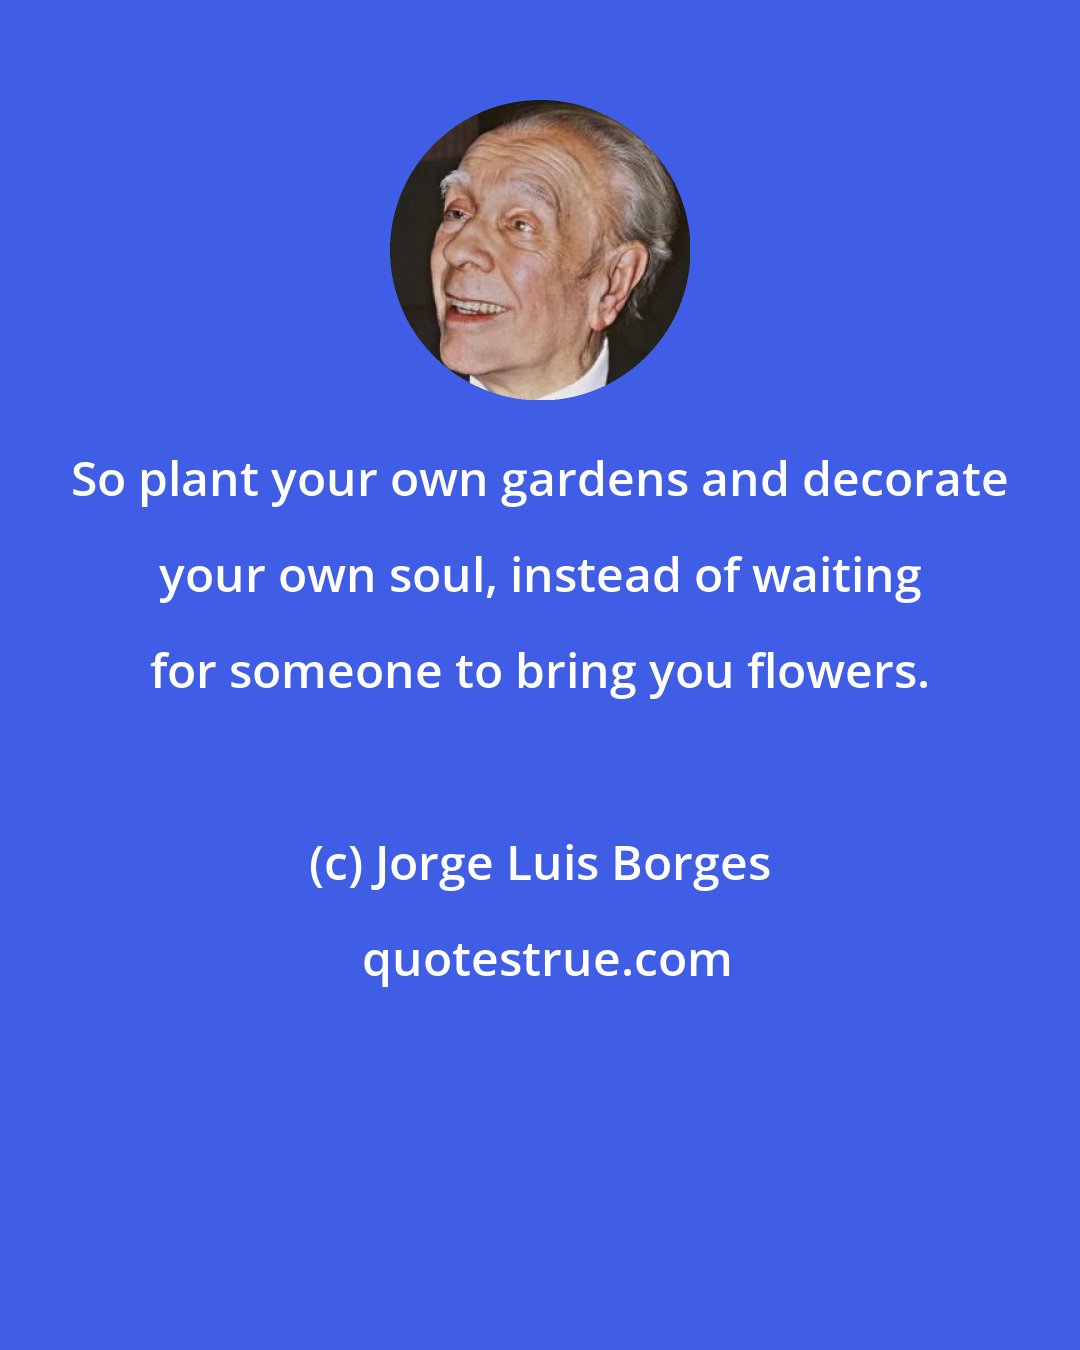 Jorge Luis Borges: So plant your own gardens and decorate your own soul, instead of waiting for someone to bring you flowers.